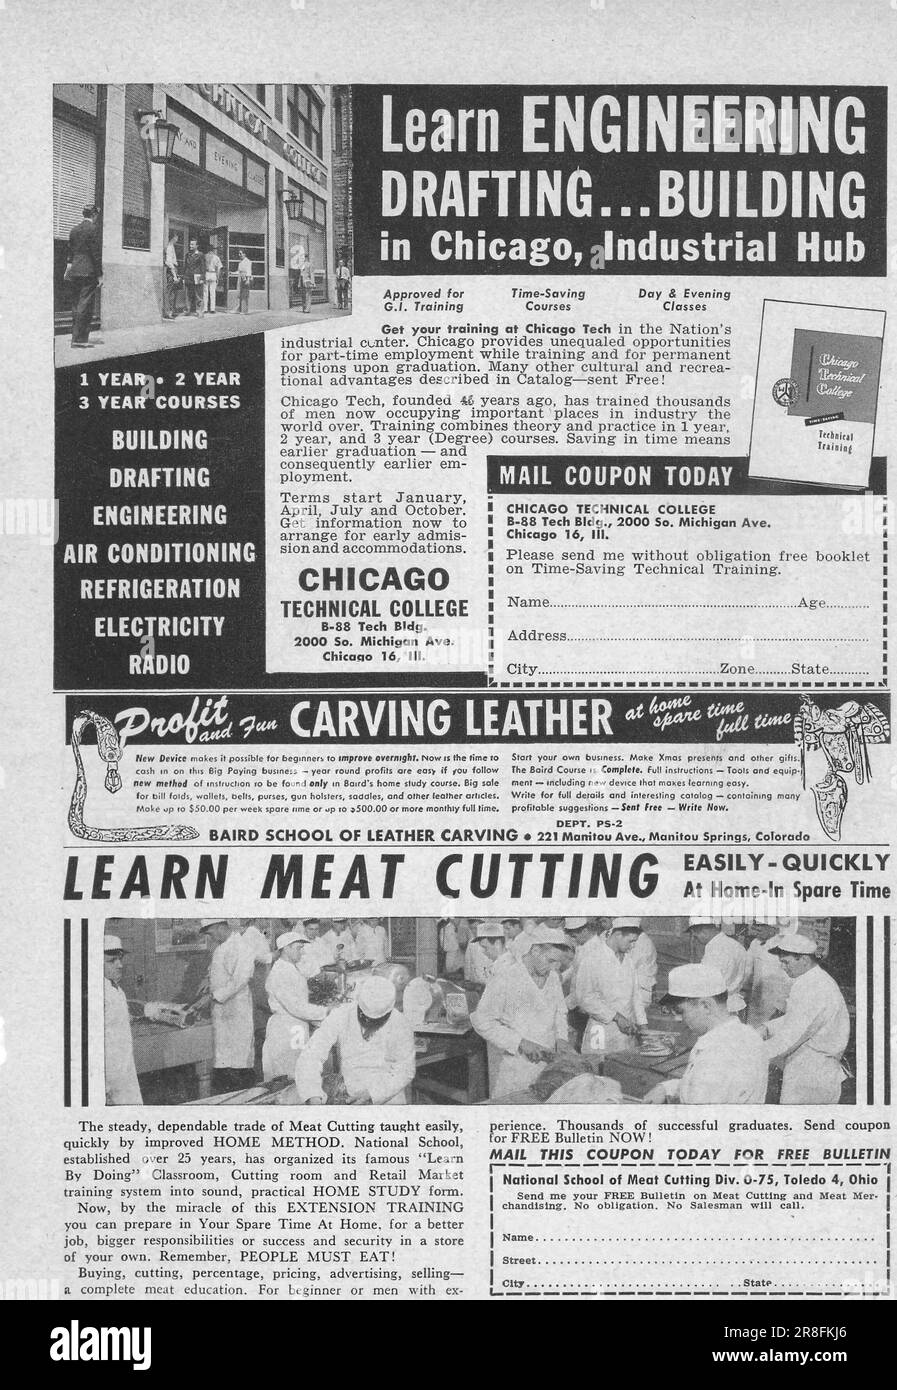 Learn engineering, learn meatcutting courses classes advertising page in Popular Science magazine, USA, February 1949 Stock Photo